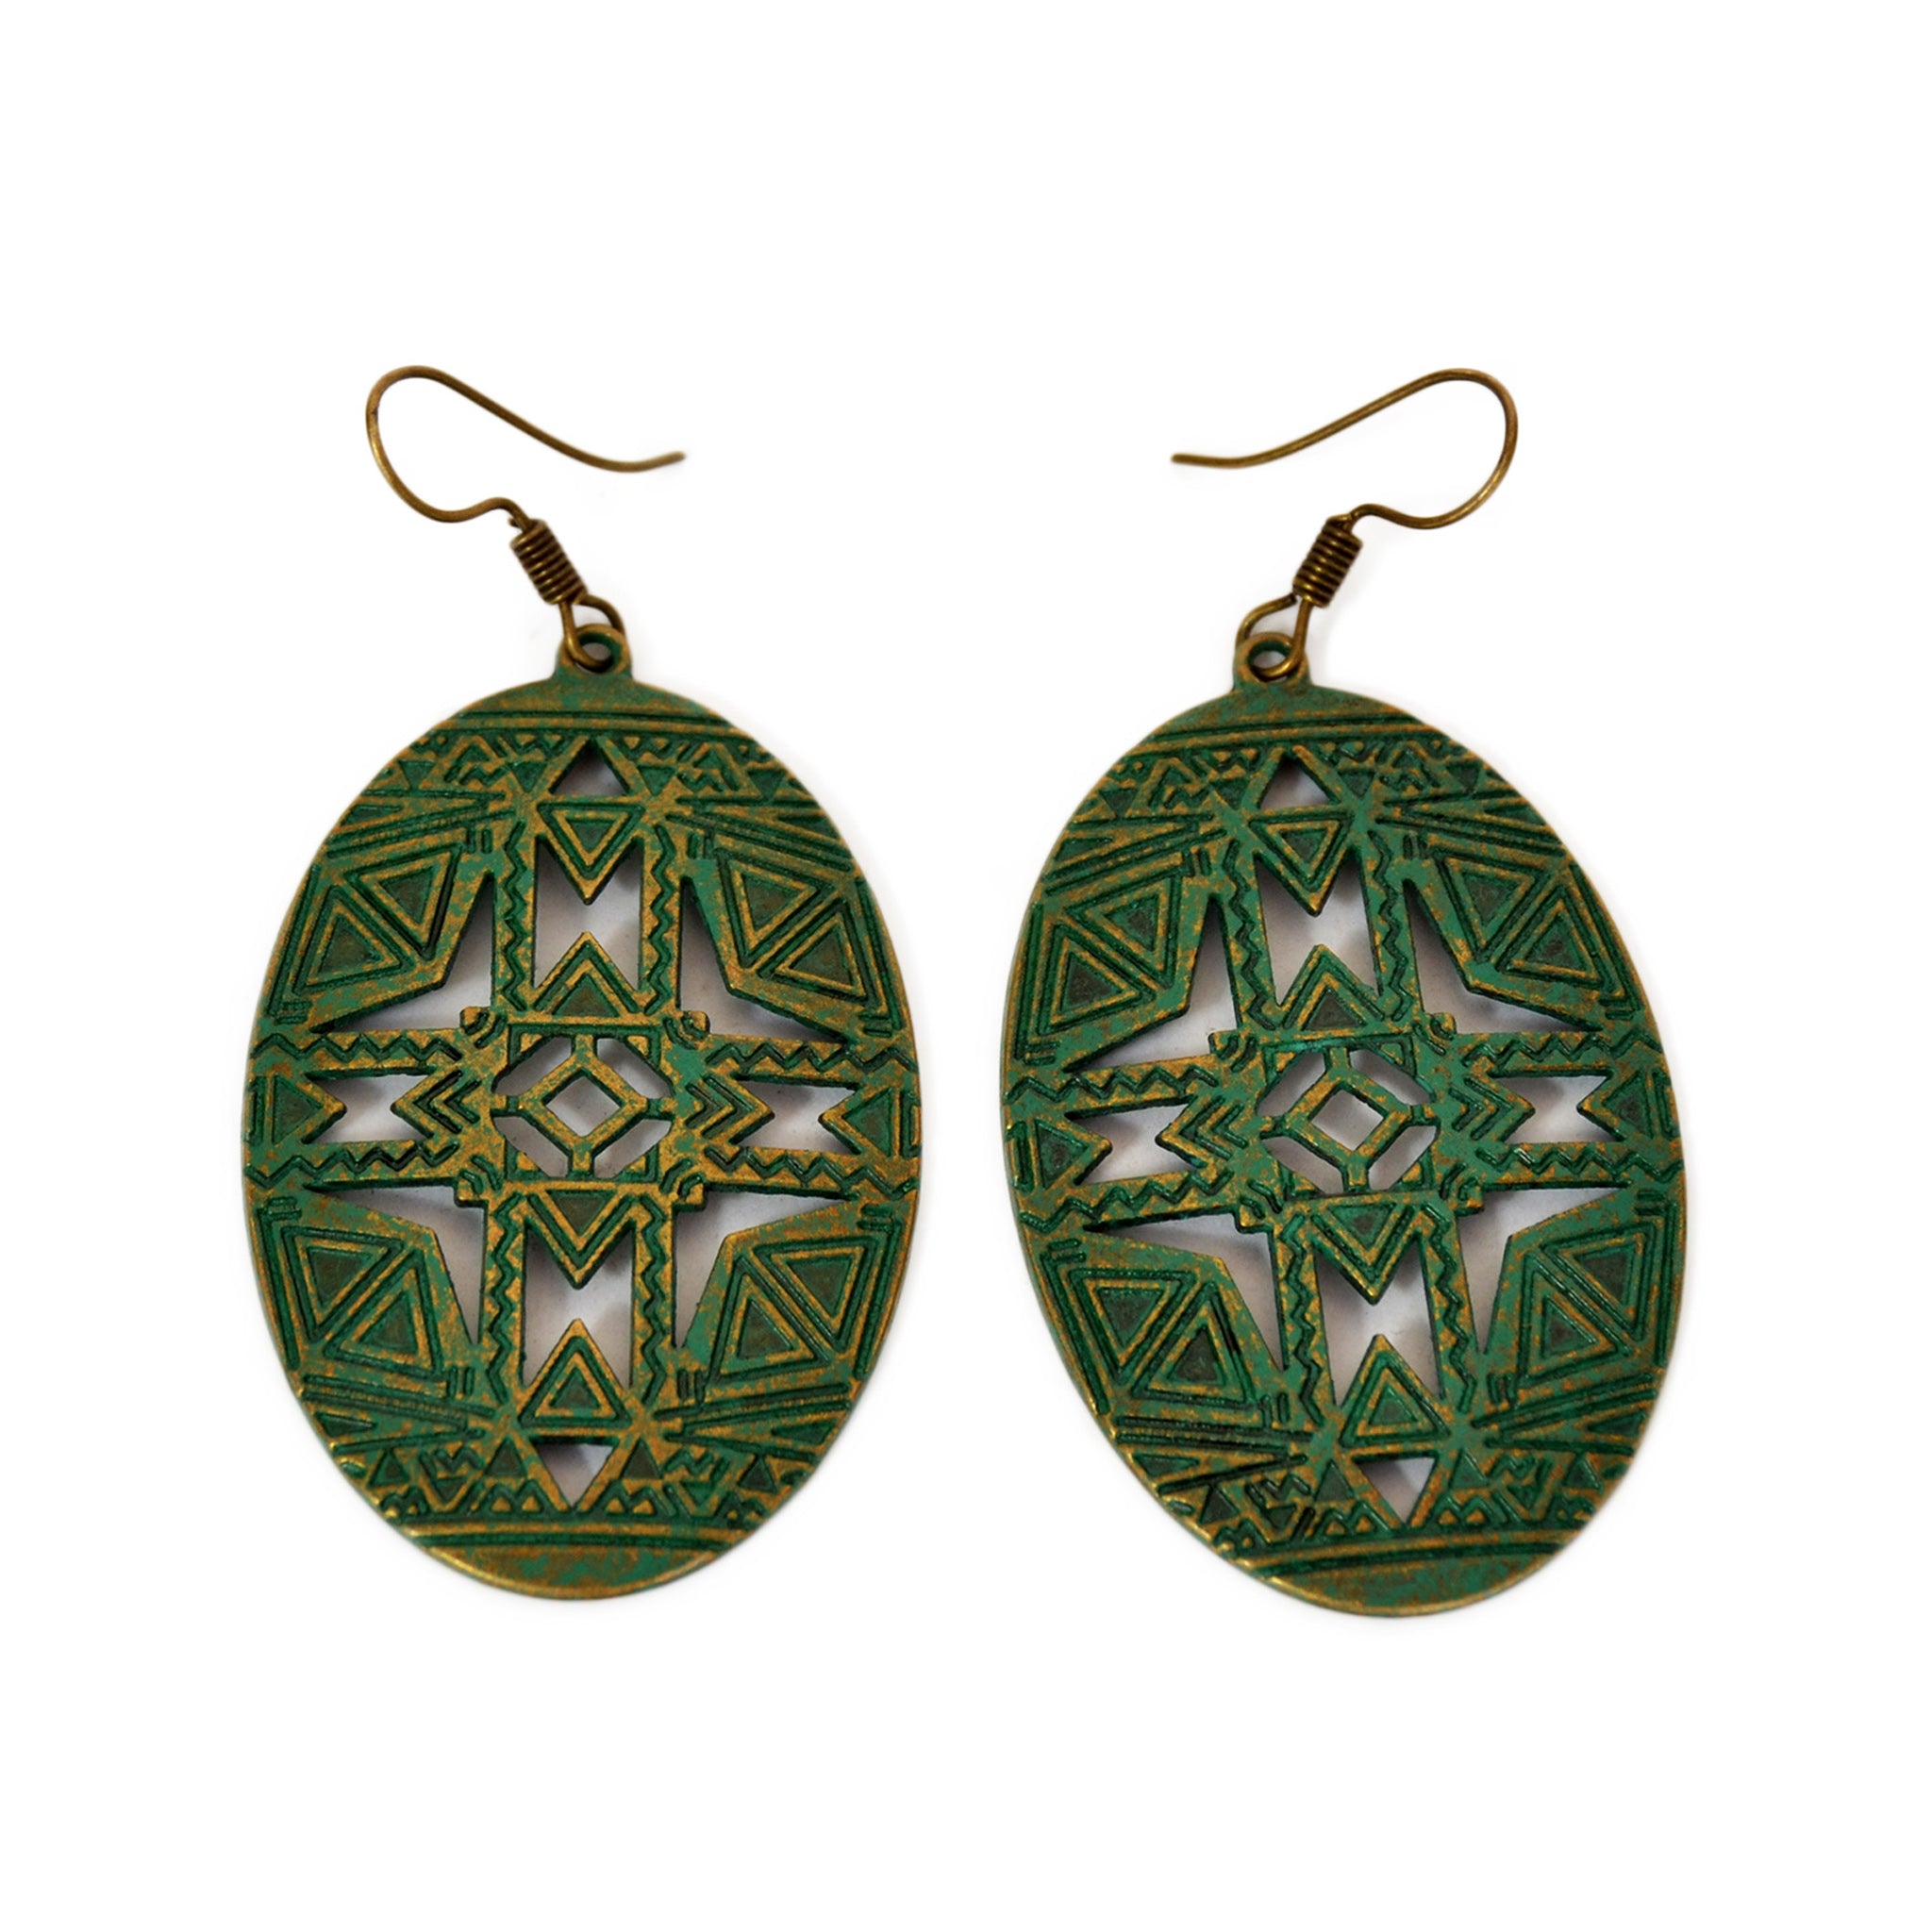 Oval hook earrings with turquoise green patina and geometric carved design